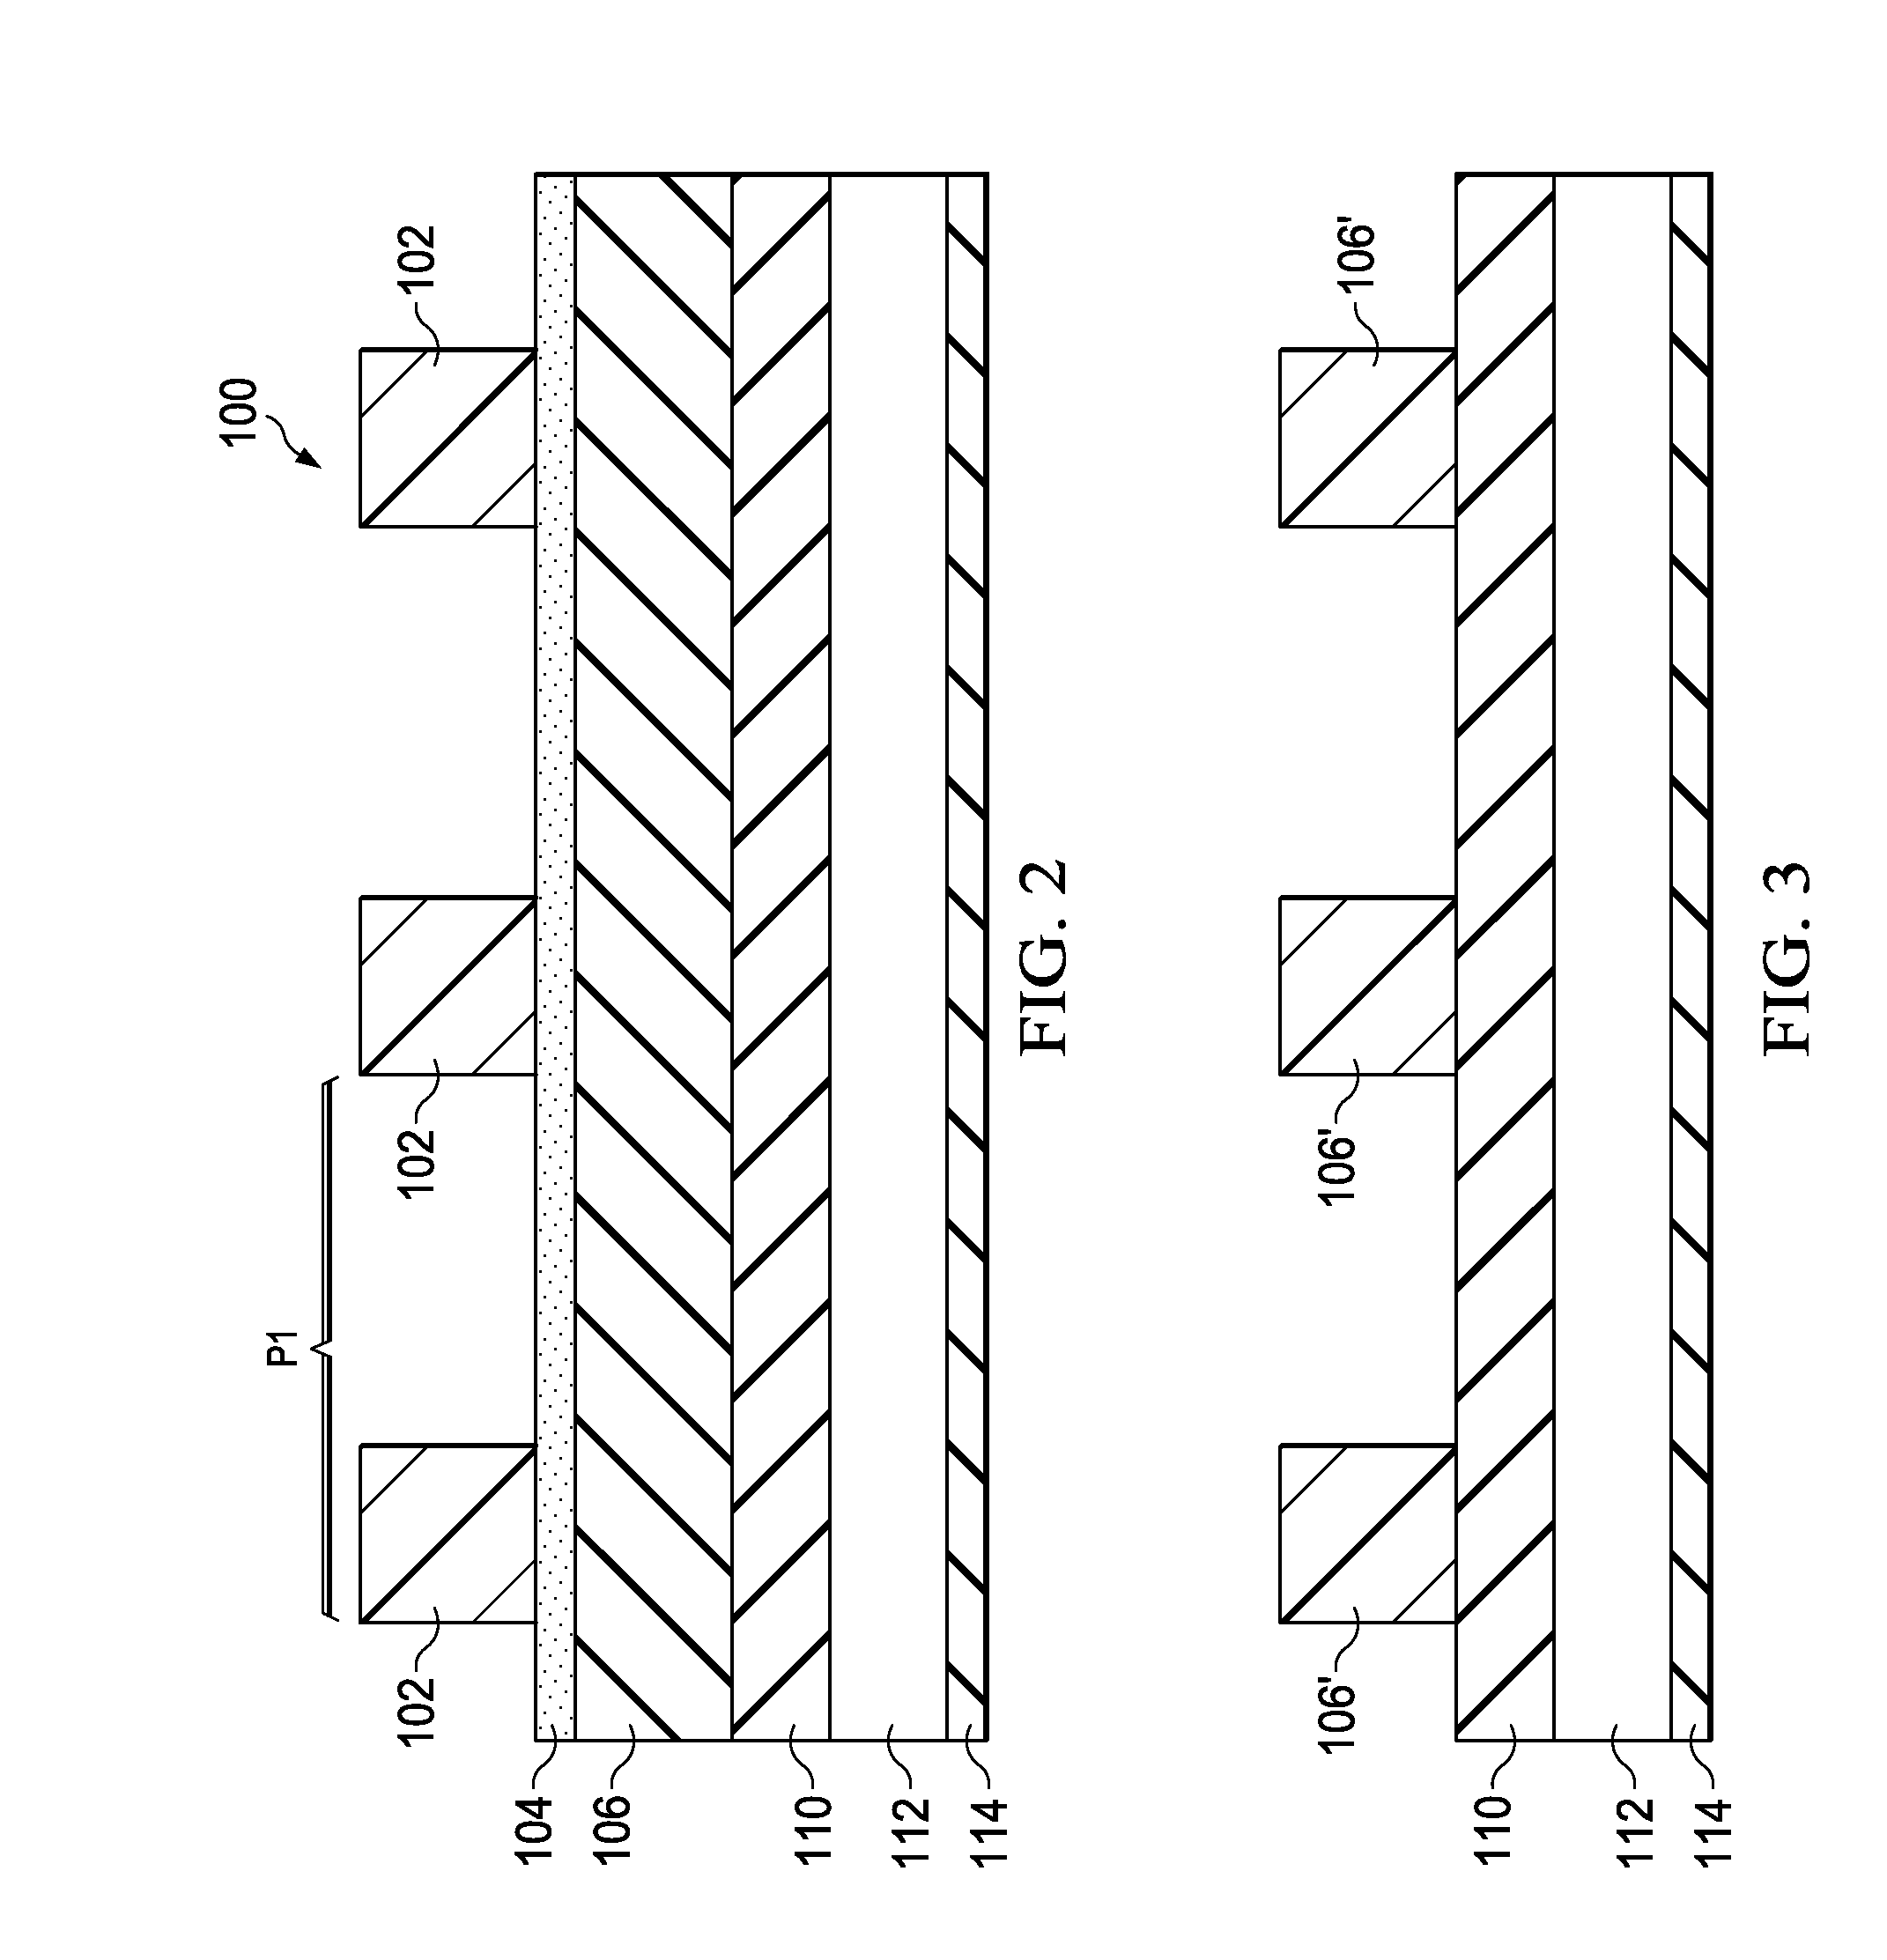 Lithography using Multilayer Spacer for Reduced Spacer Footing